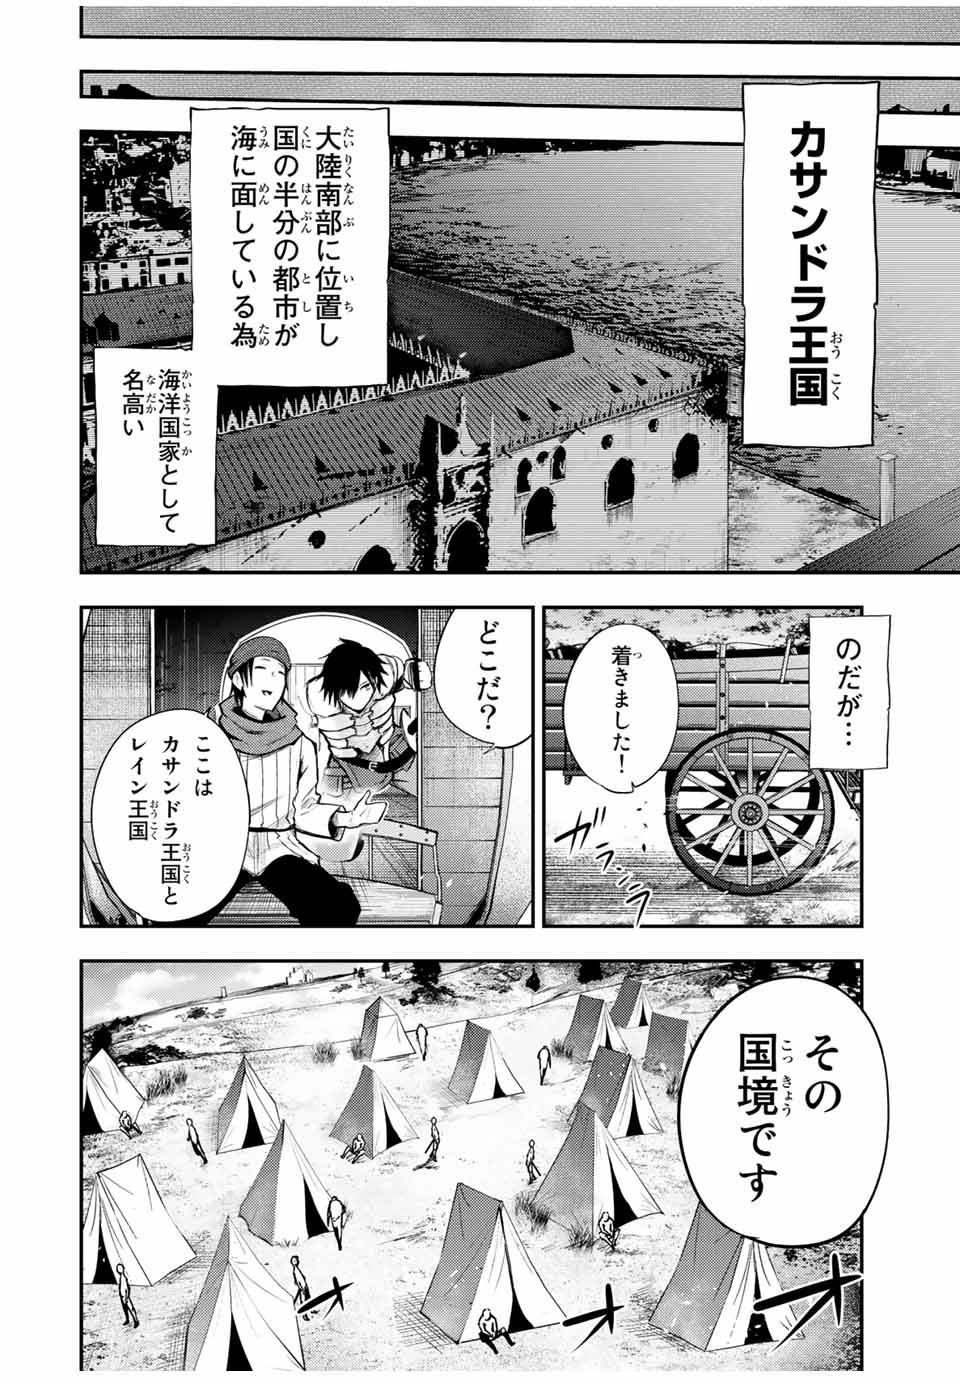 the strongest former prince-; 奴隷転生 ～その奴隷、最強の元王子につき～ 第27話 - Page 6